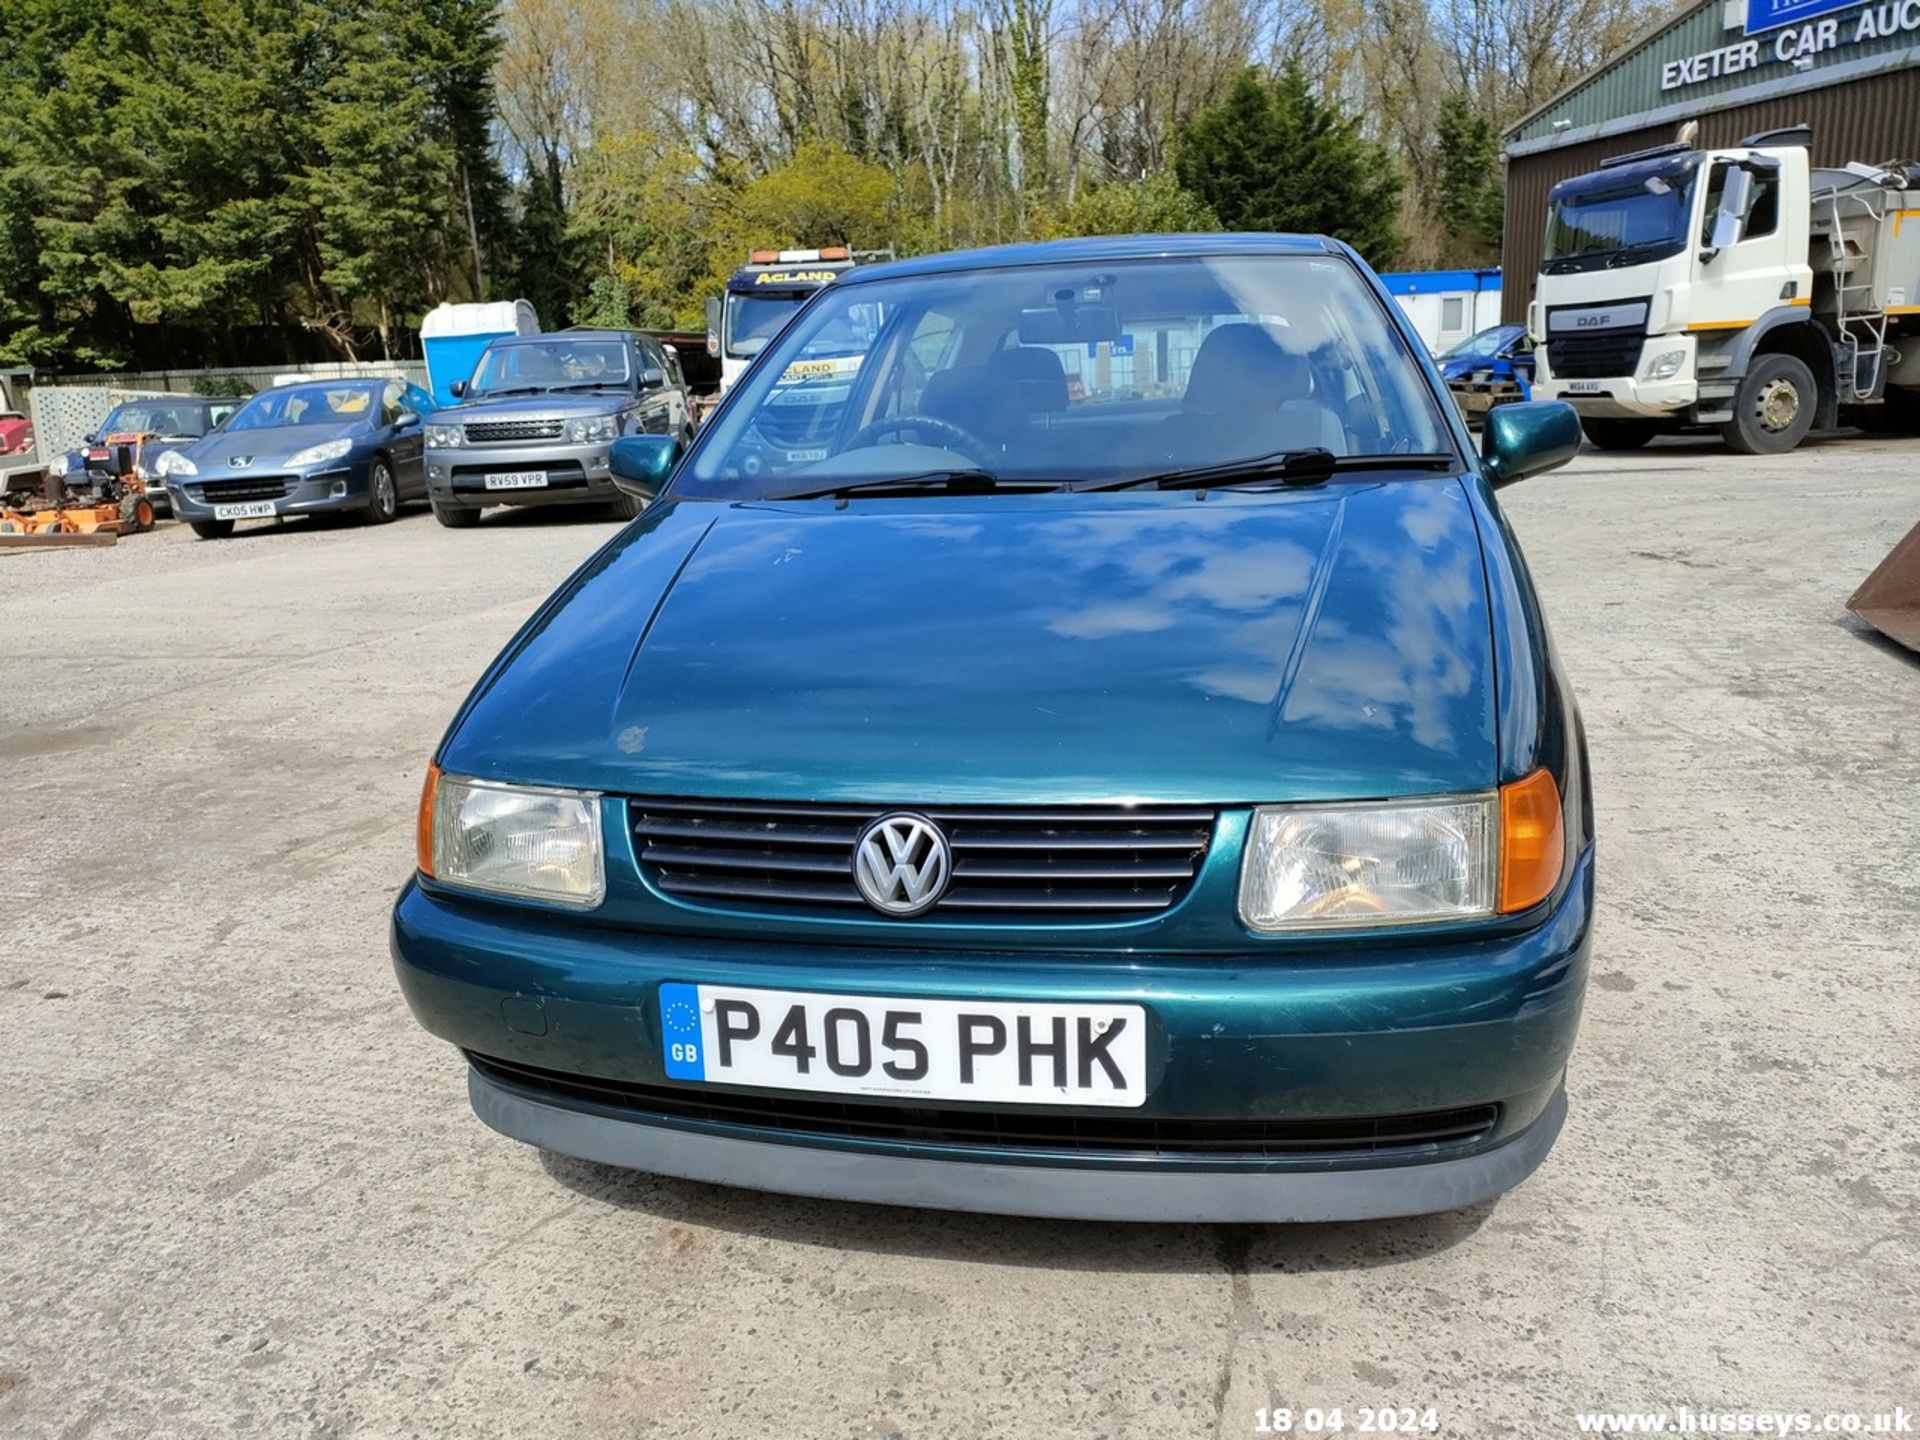 1997 VOLKSWAGEN POLO 1.4 CL AUTO - 1390cc 3dr Hatchback (Green, 68k) - Image 8 of 60